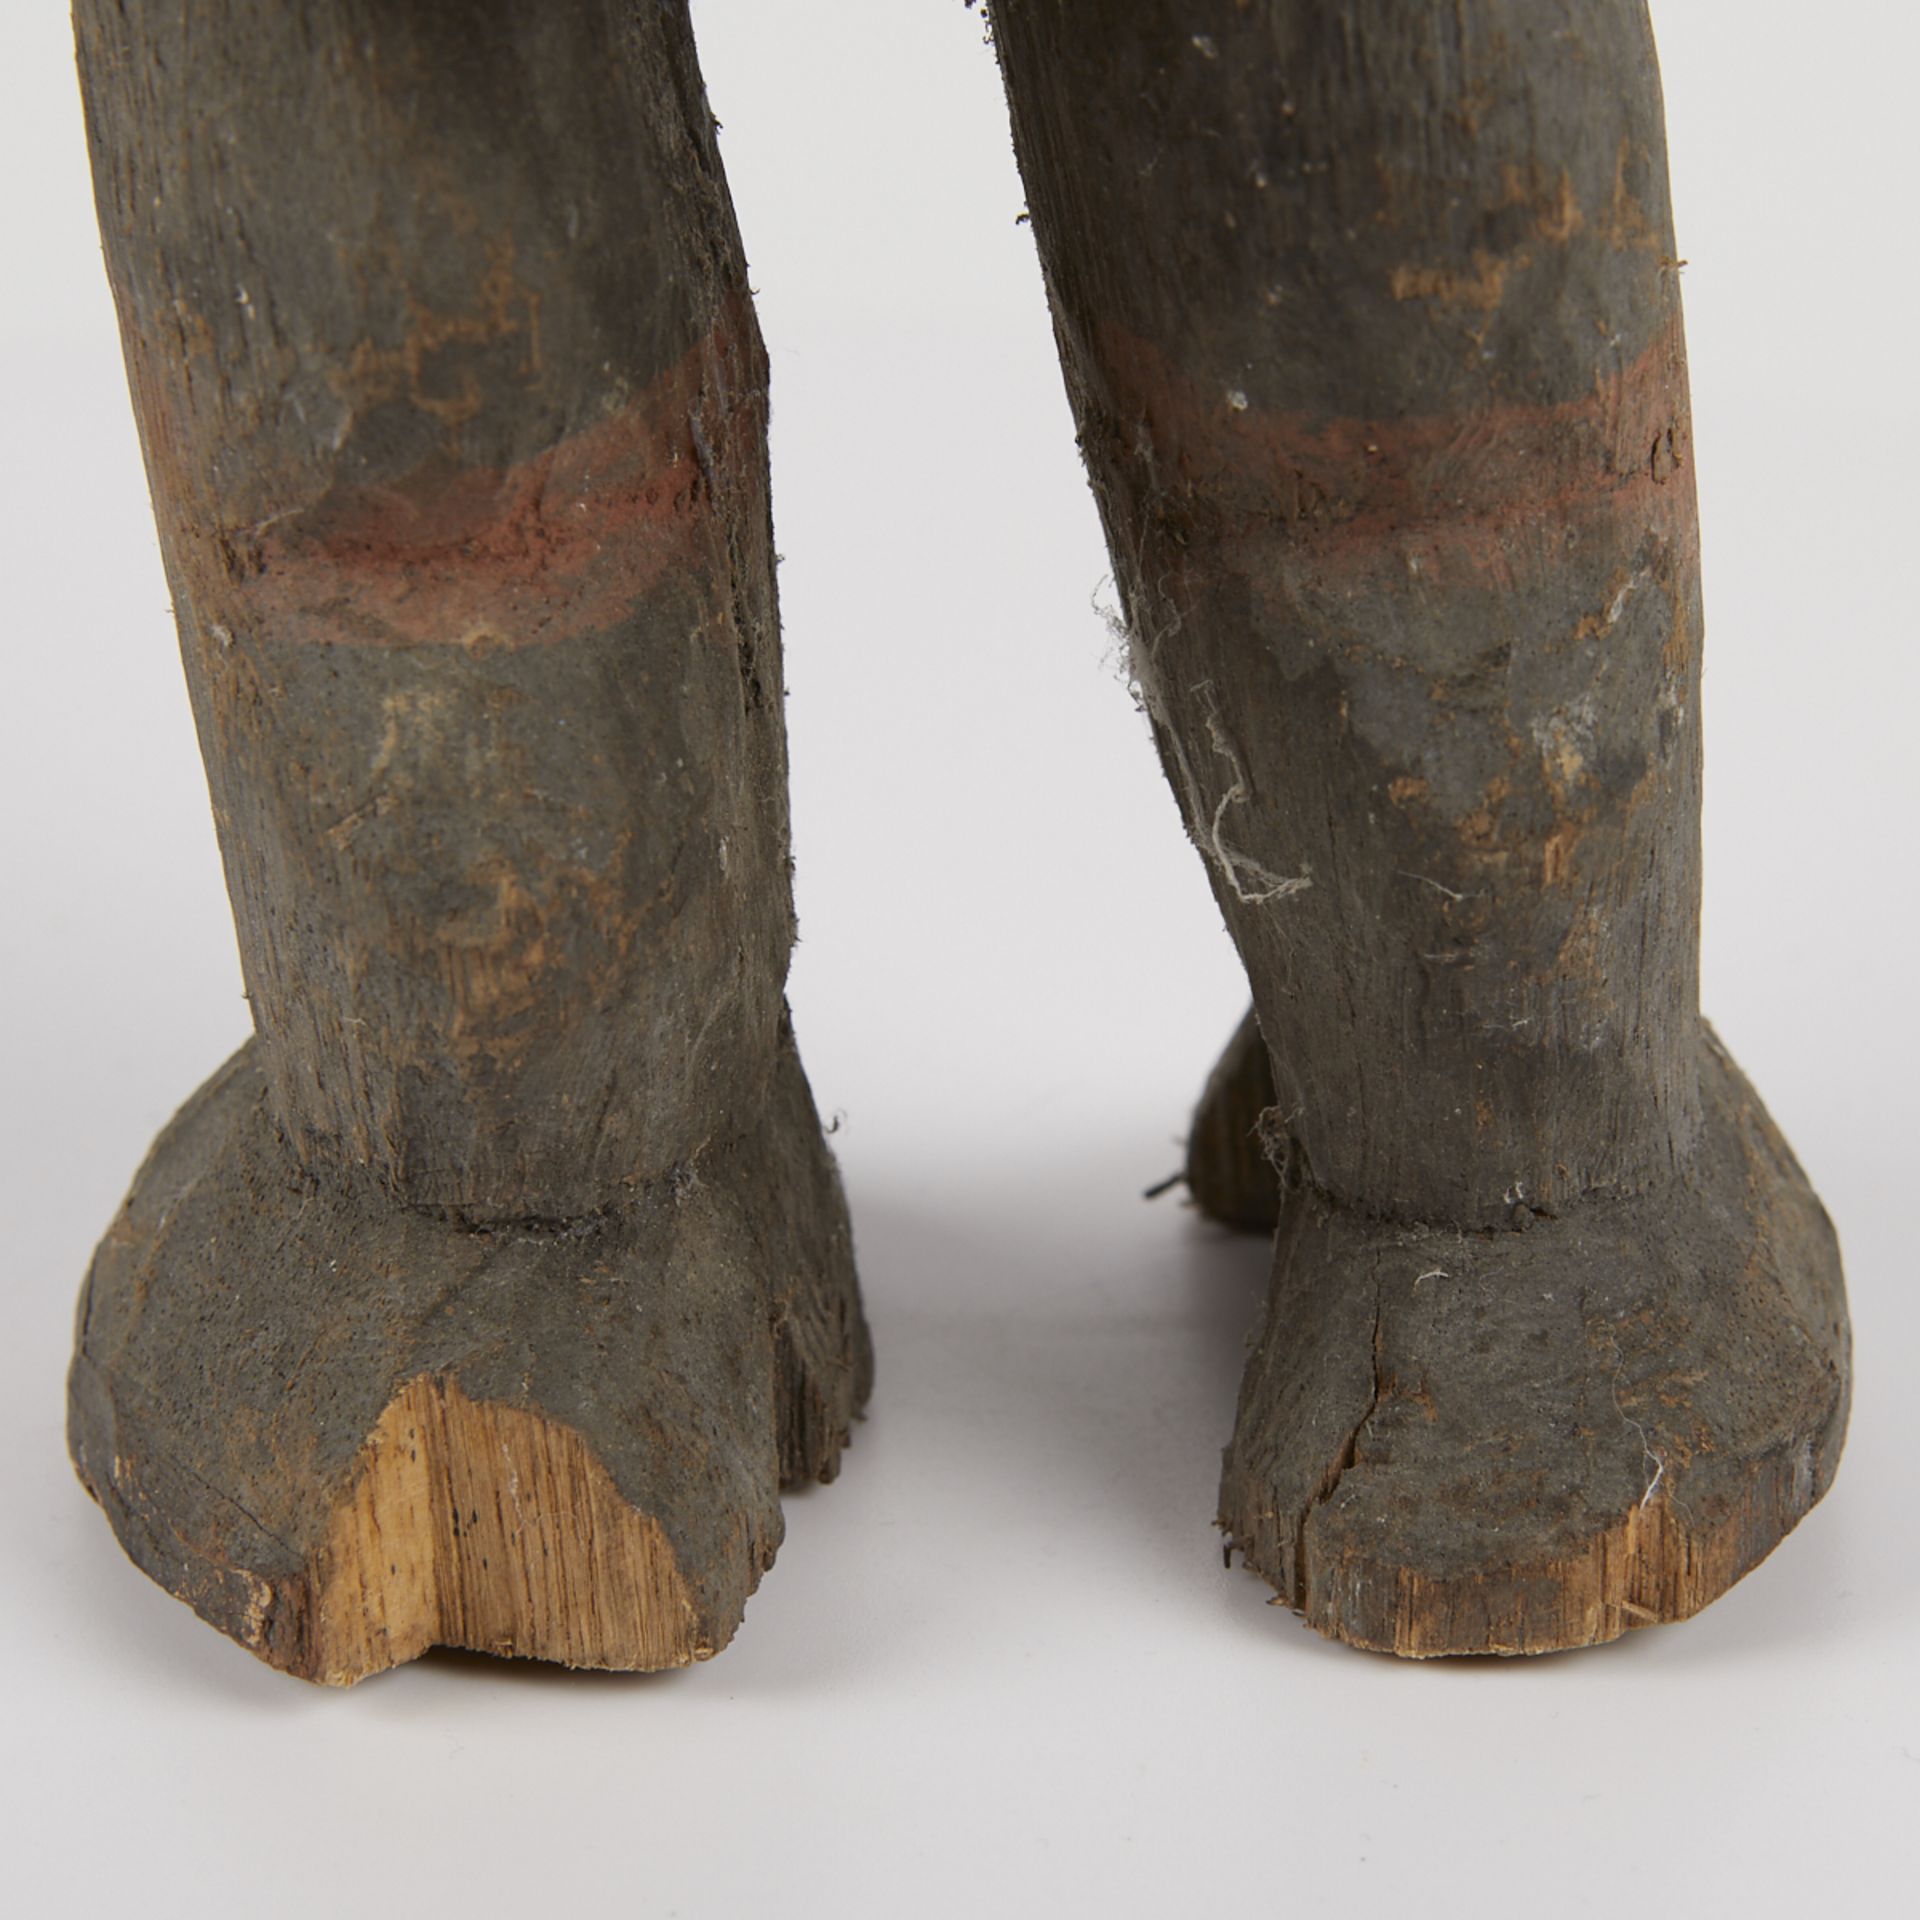 Grp: 5 20th c. African Carved Wood Figures - Image 38 of 38